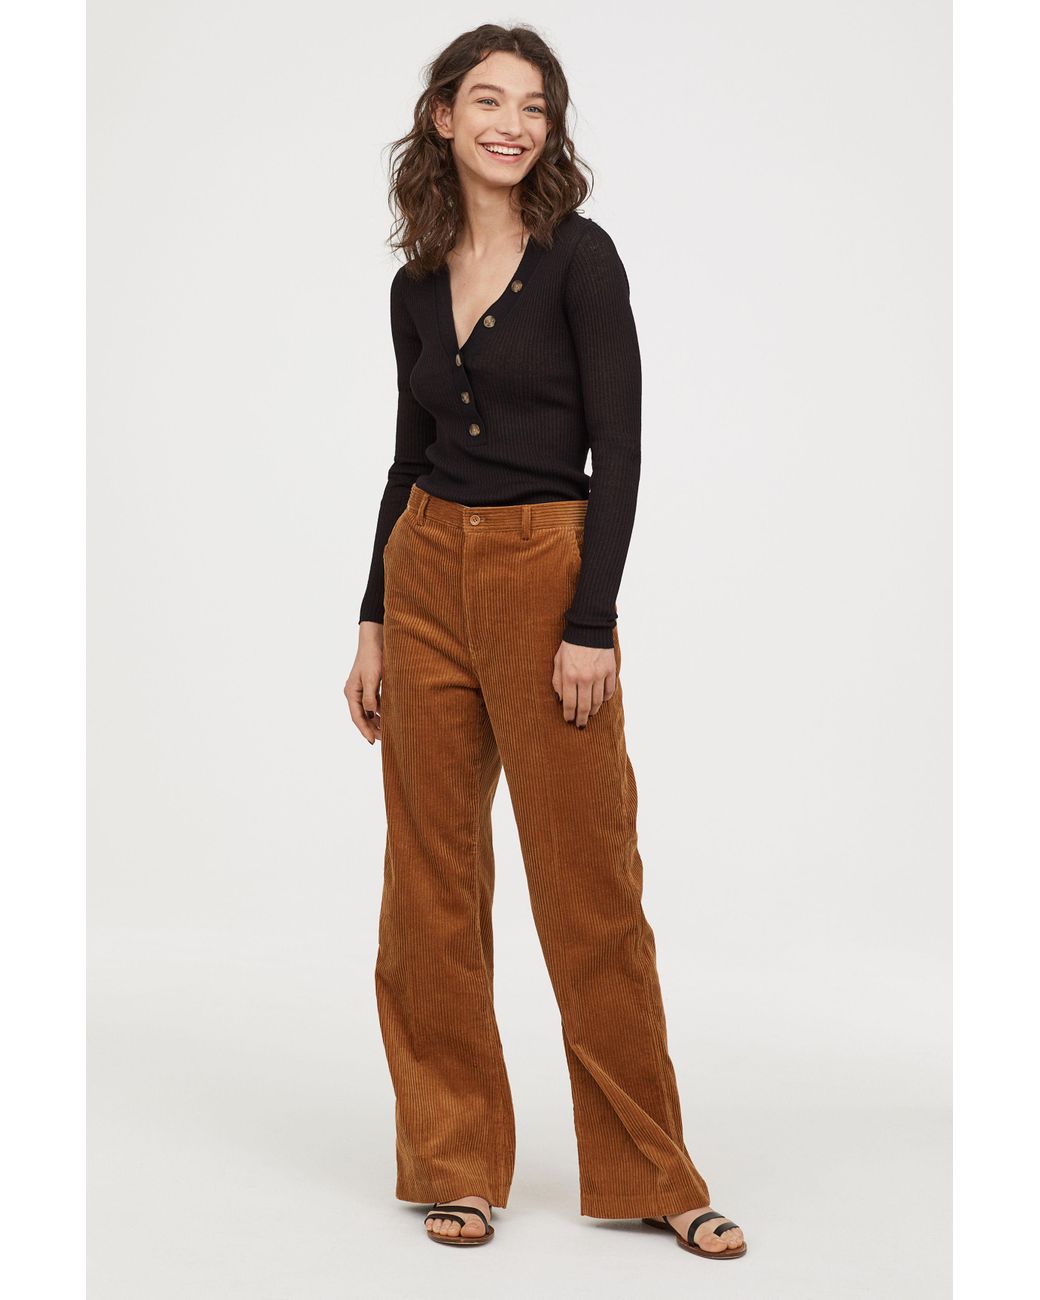 EVALESS Corduroy Pants for Women Casual High Waisted India  Ubuy